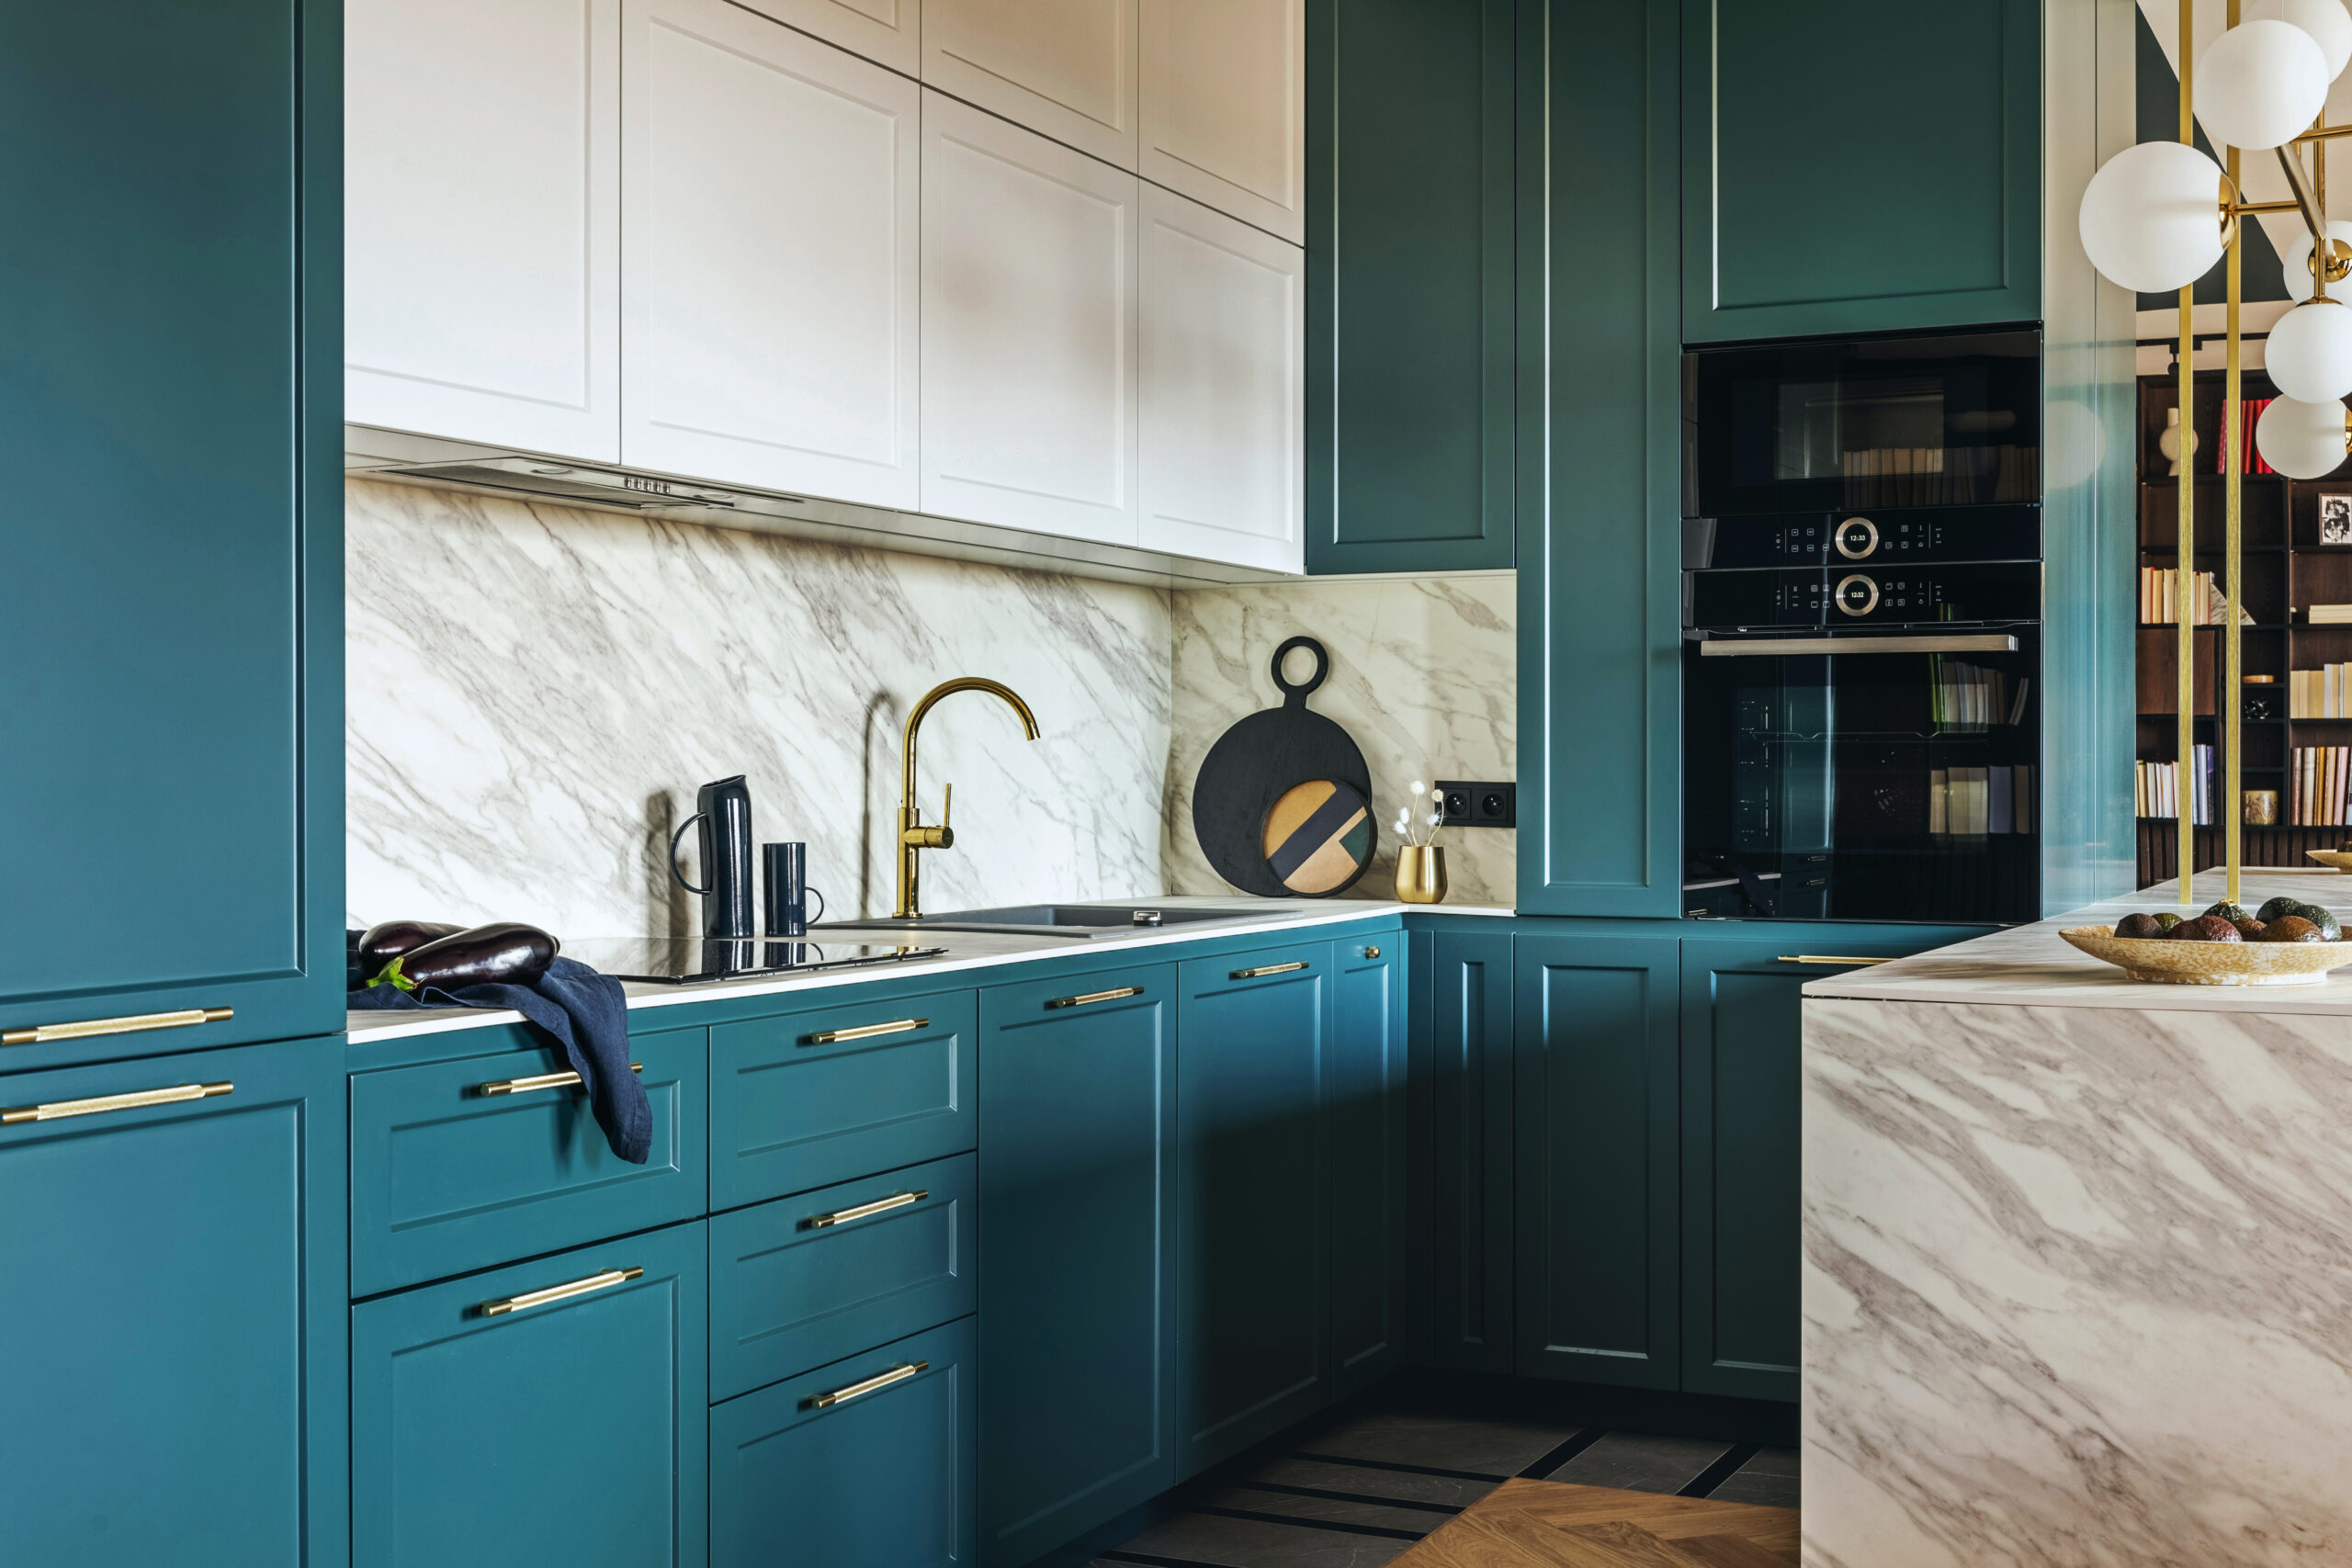 Turquoise kitchen cabinets for a vibrant and refreshing culinary space.